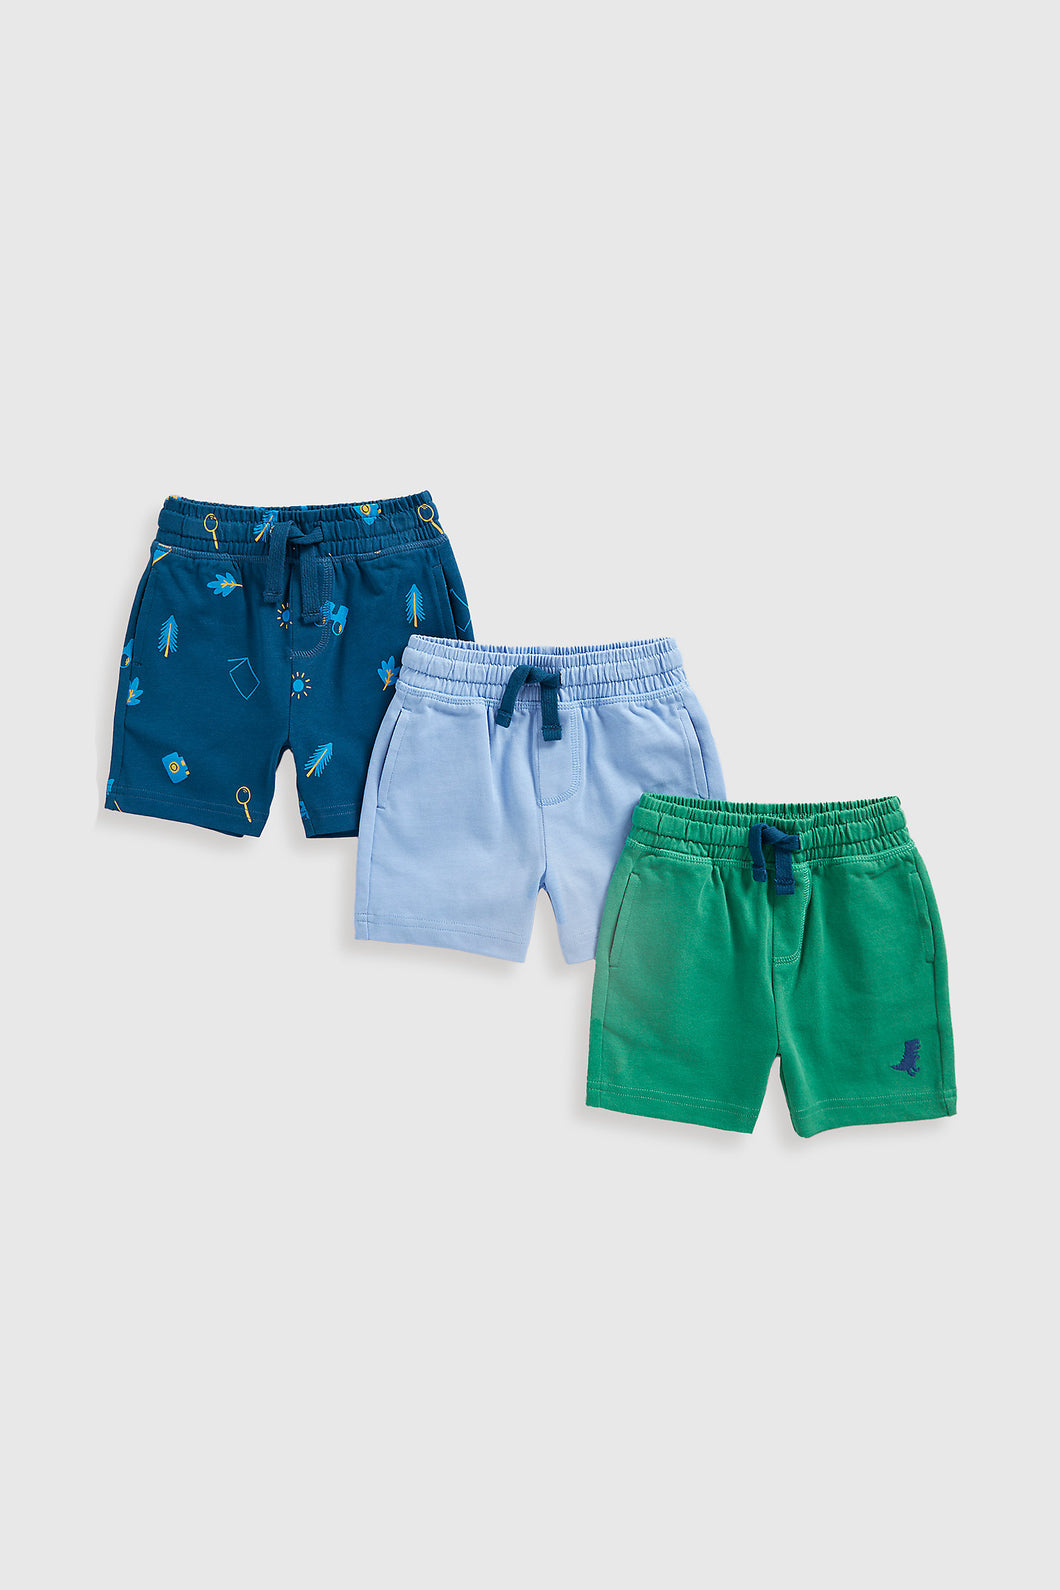 Mothercare Summer Camp Jersey Shorts - 3 Pack